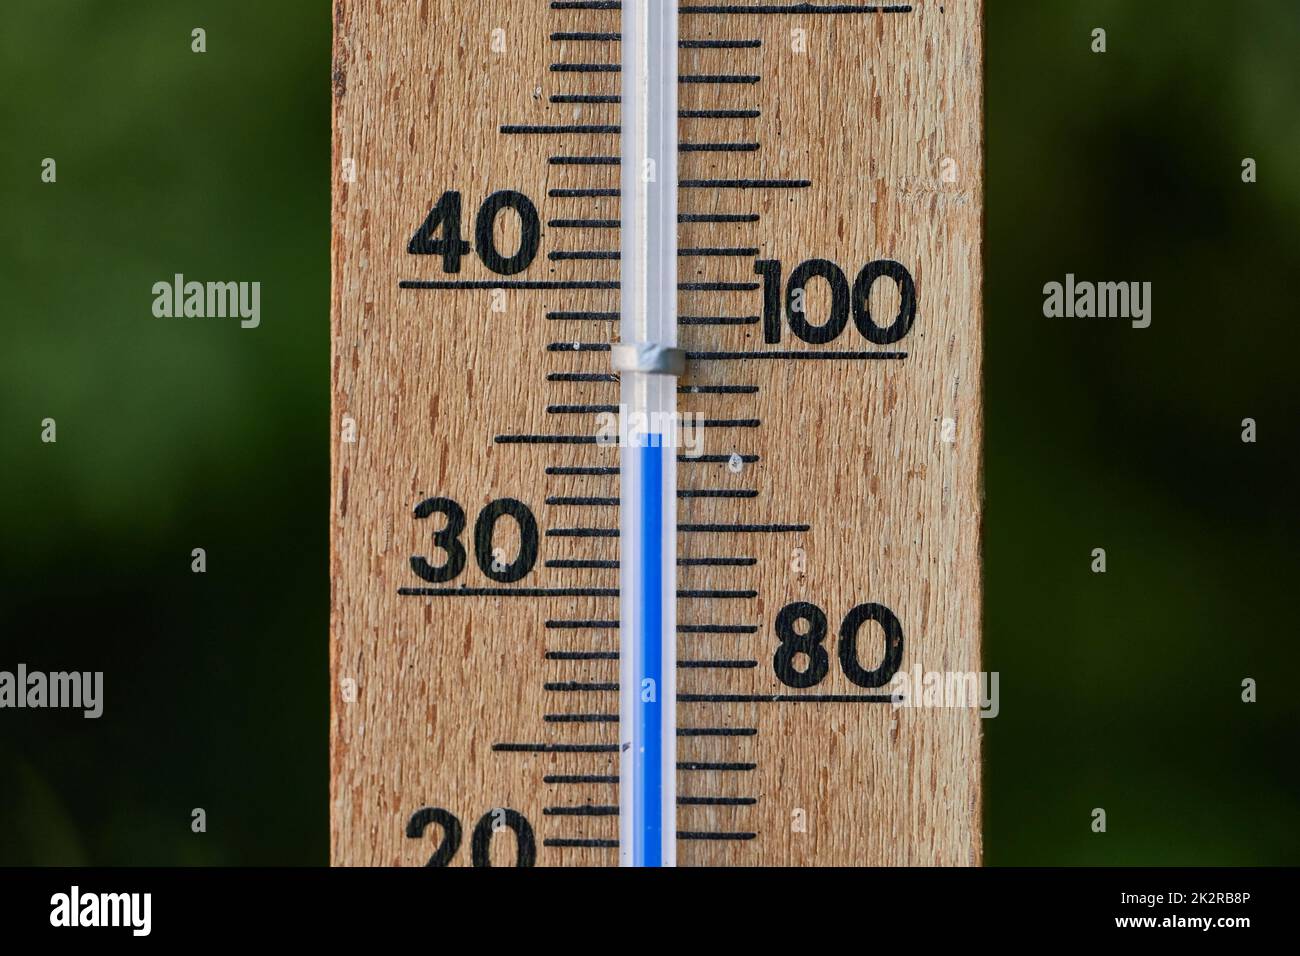 https://c8.alamy.com/comp/2K2RB8P/thermometer-in-summer-2K2RB8P.jpg